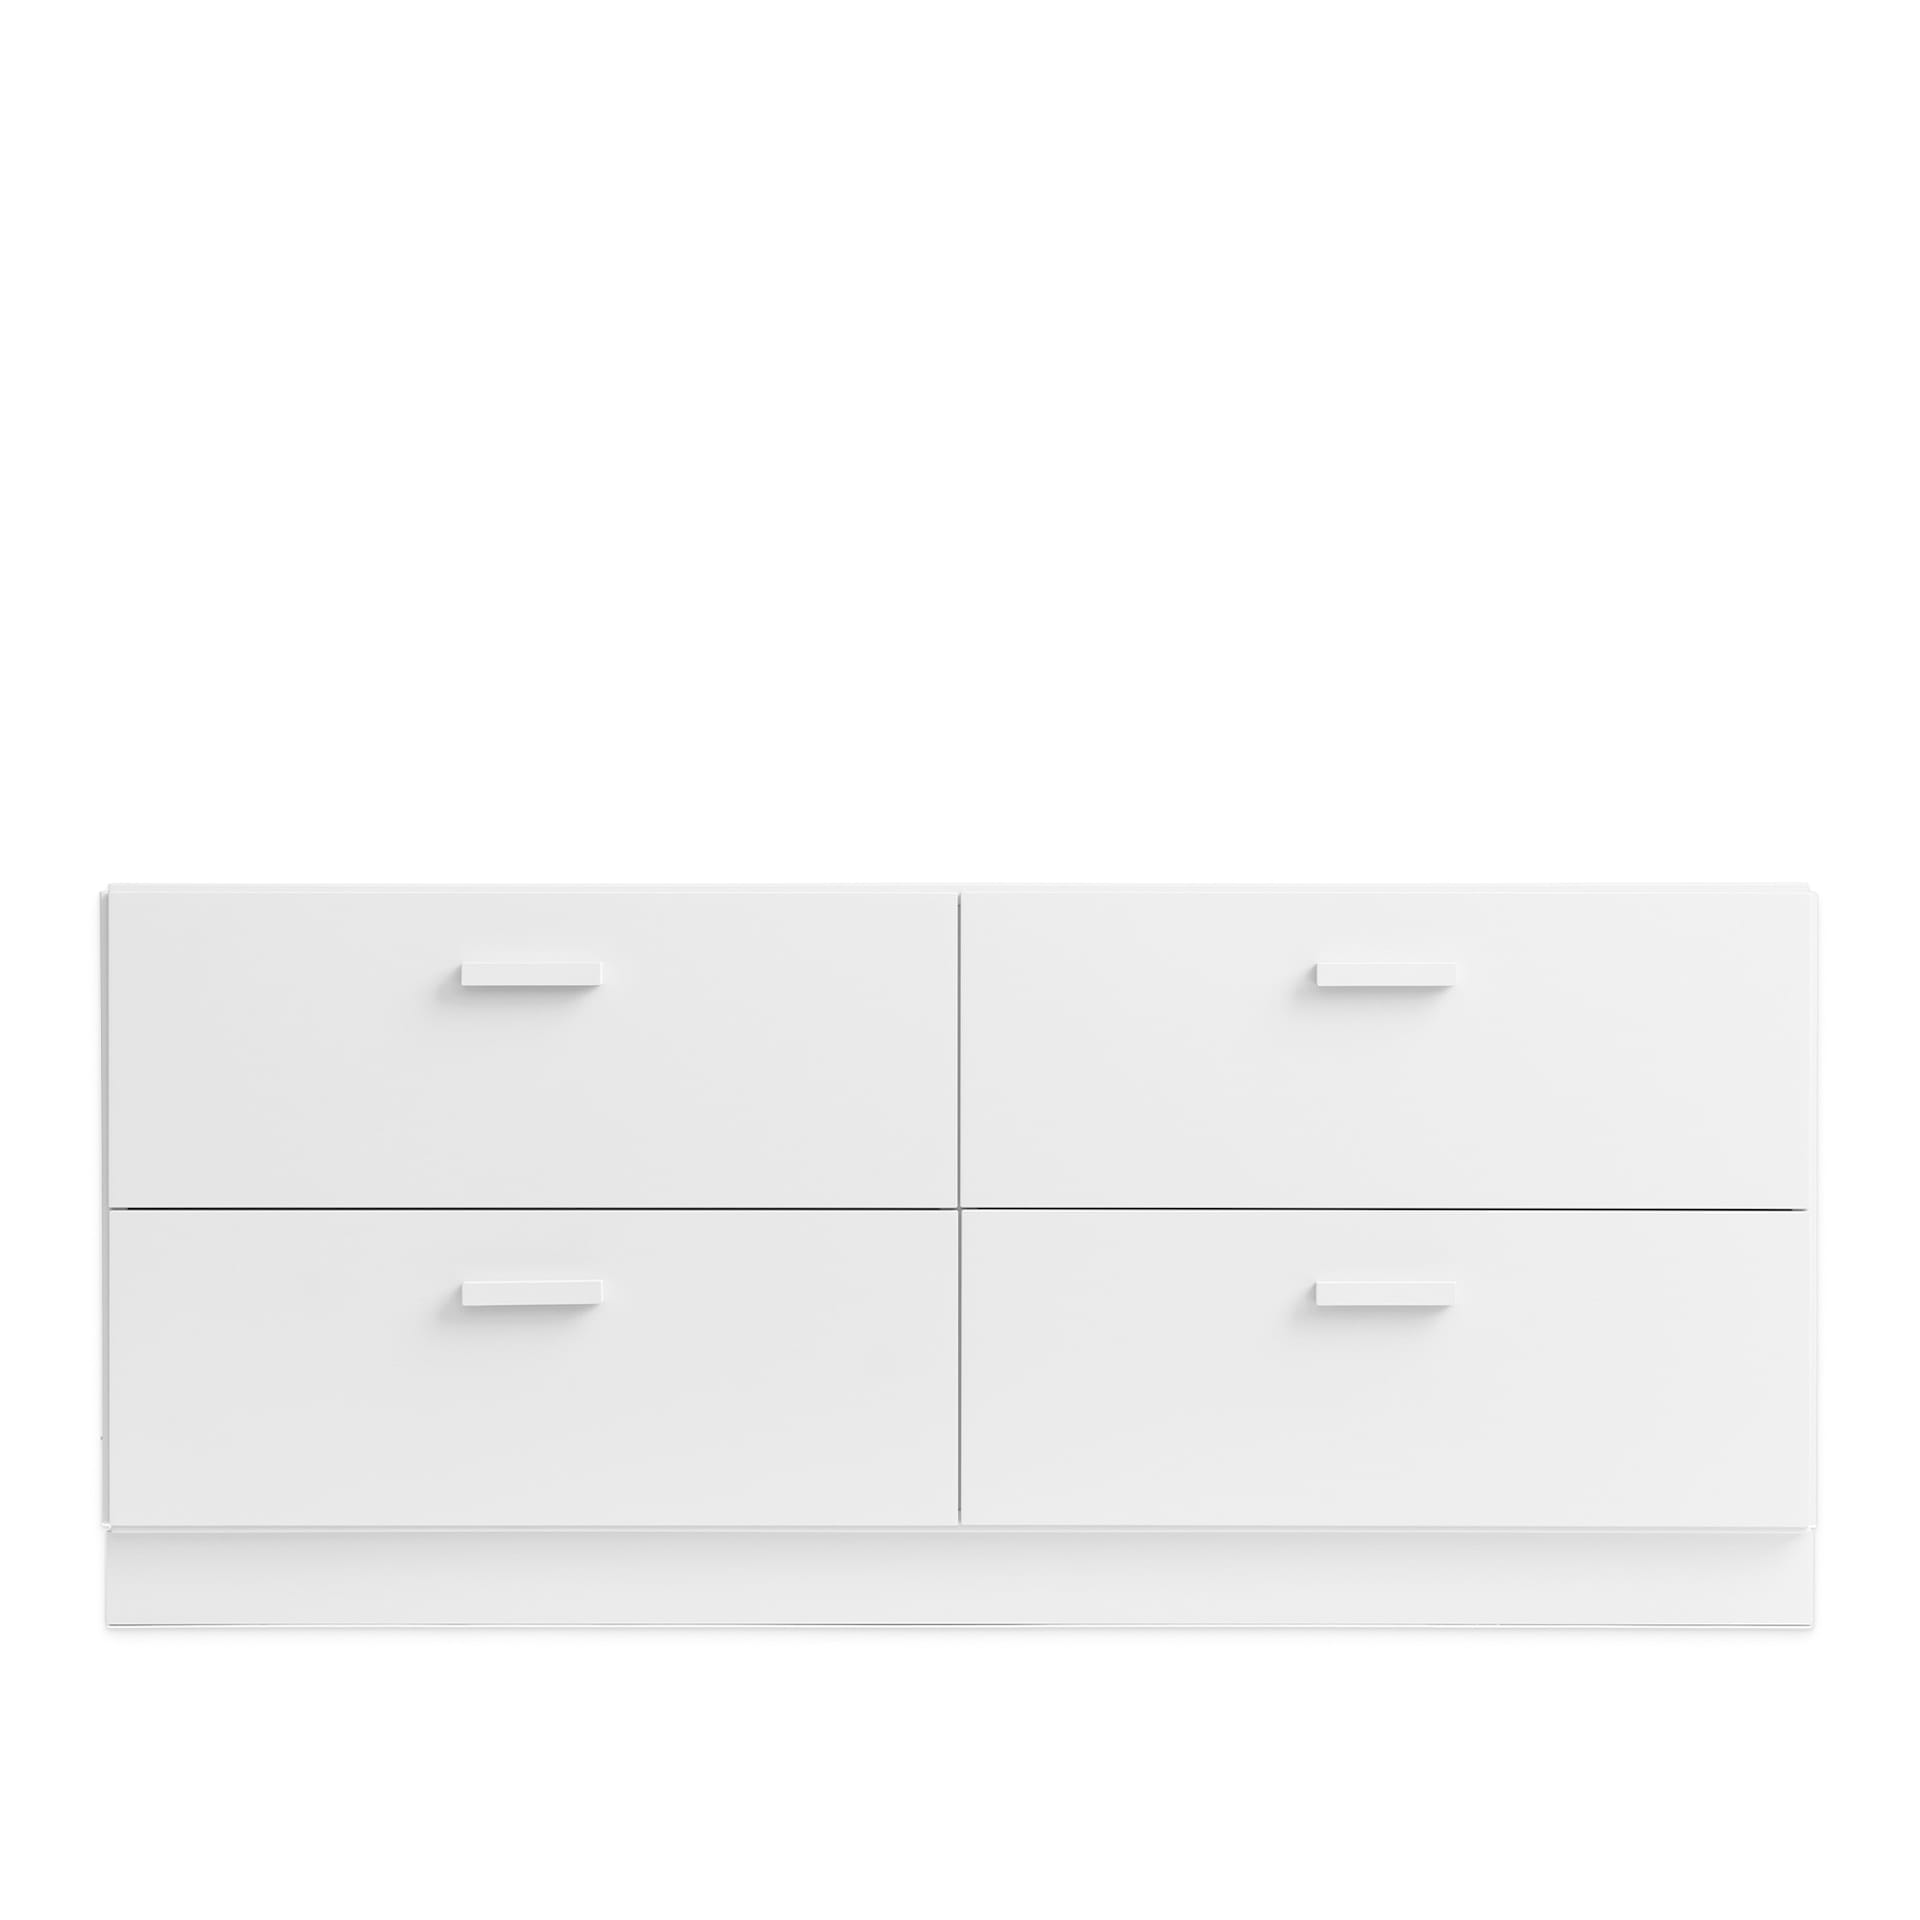 Relief Chest of Drawers Low Plinth - Relief - NO GA